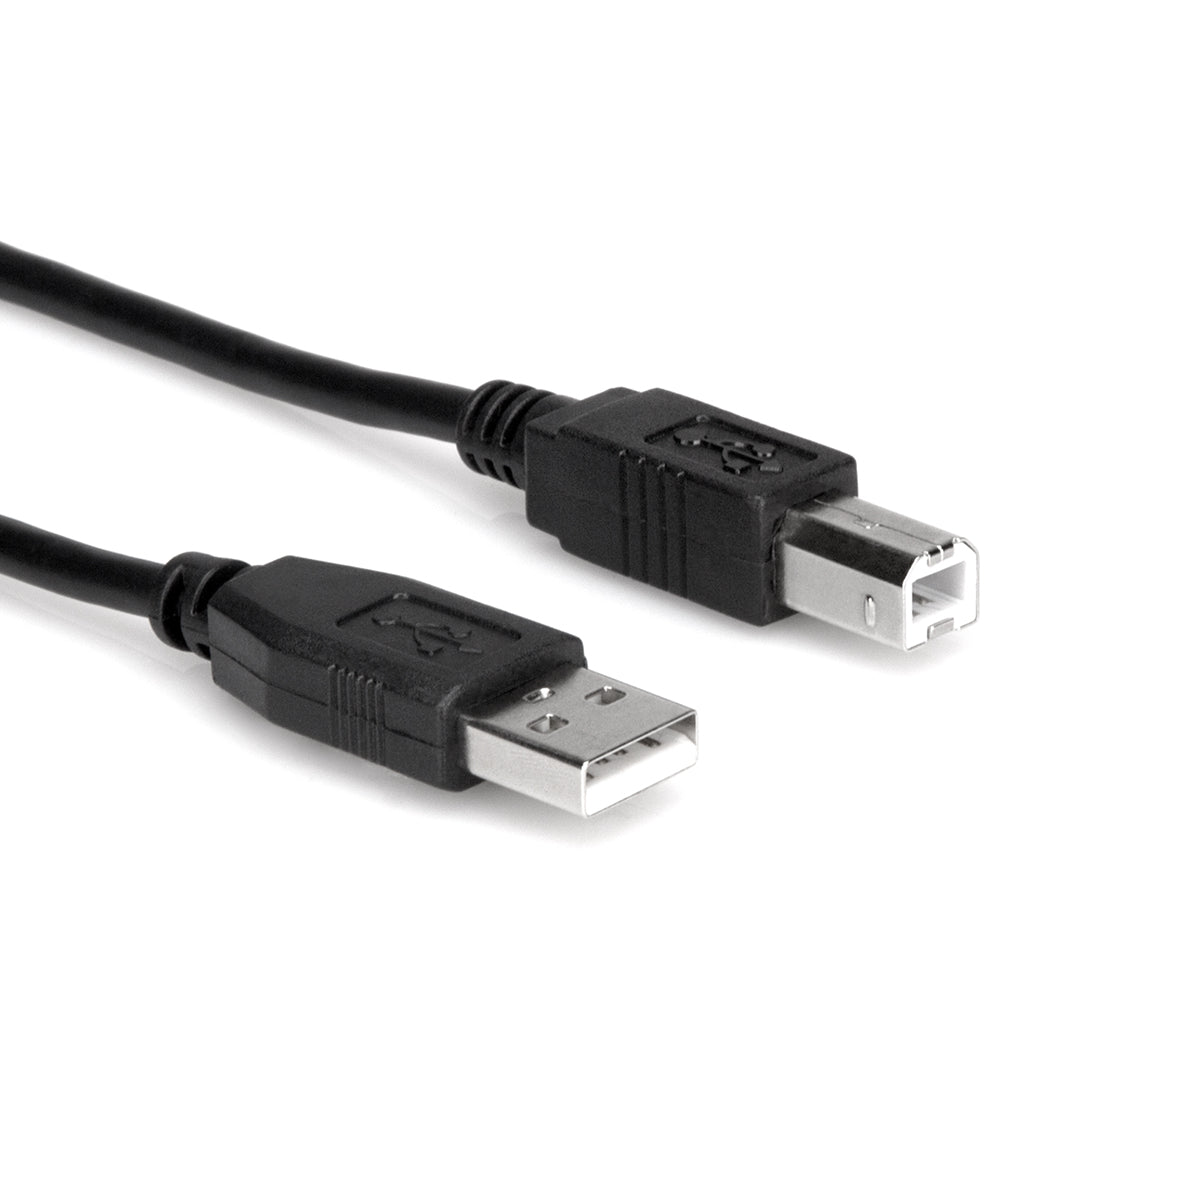 Hosa USB-205AB 5ft USB 2.0 Type A to Type B cable